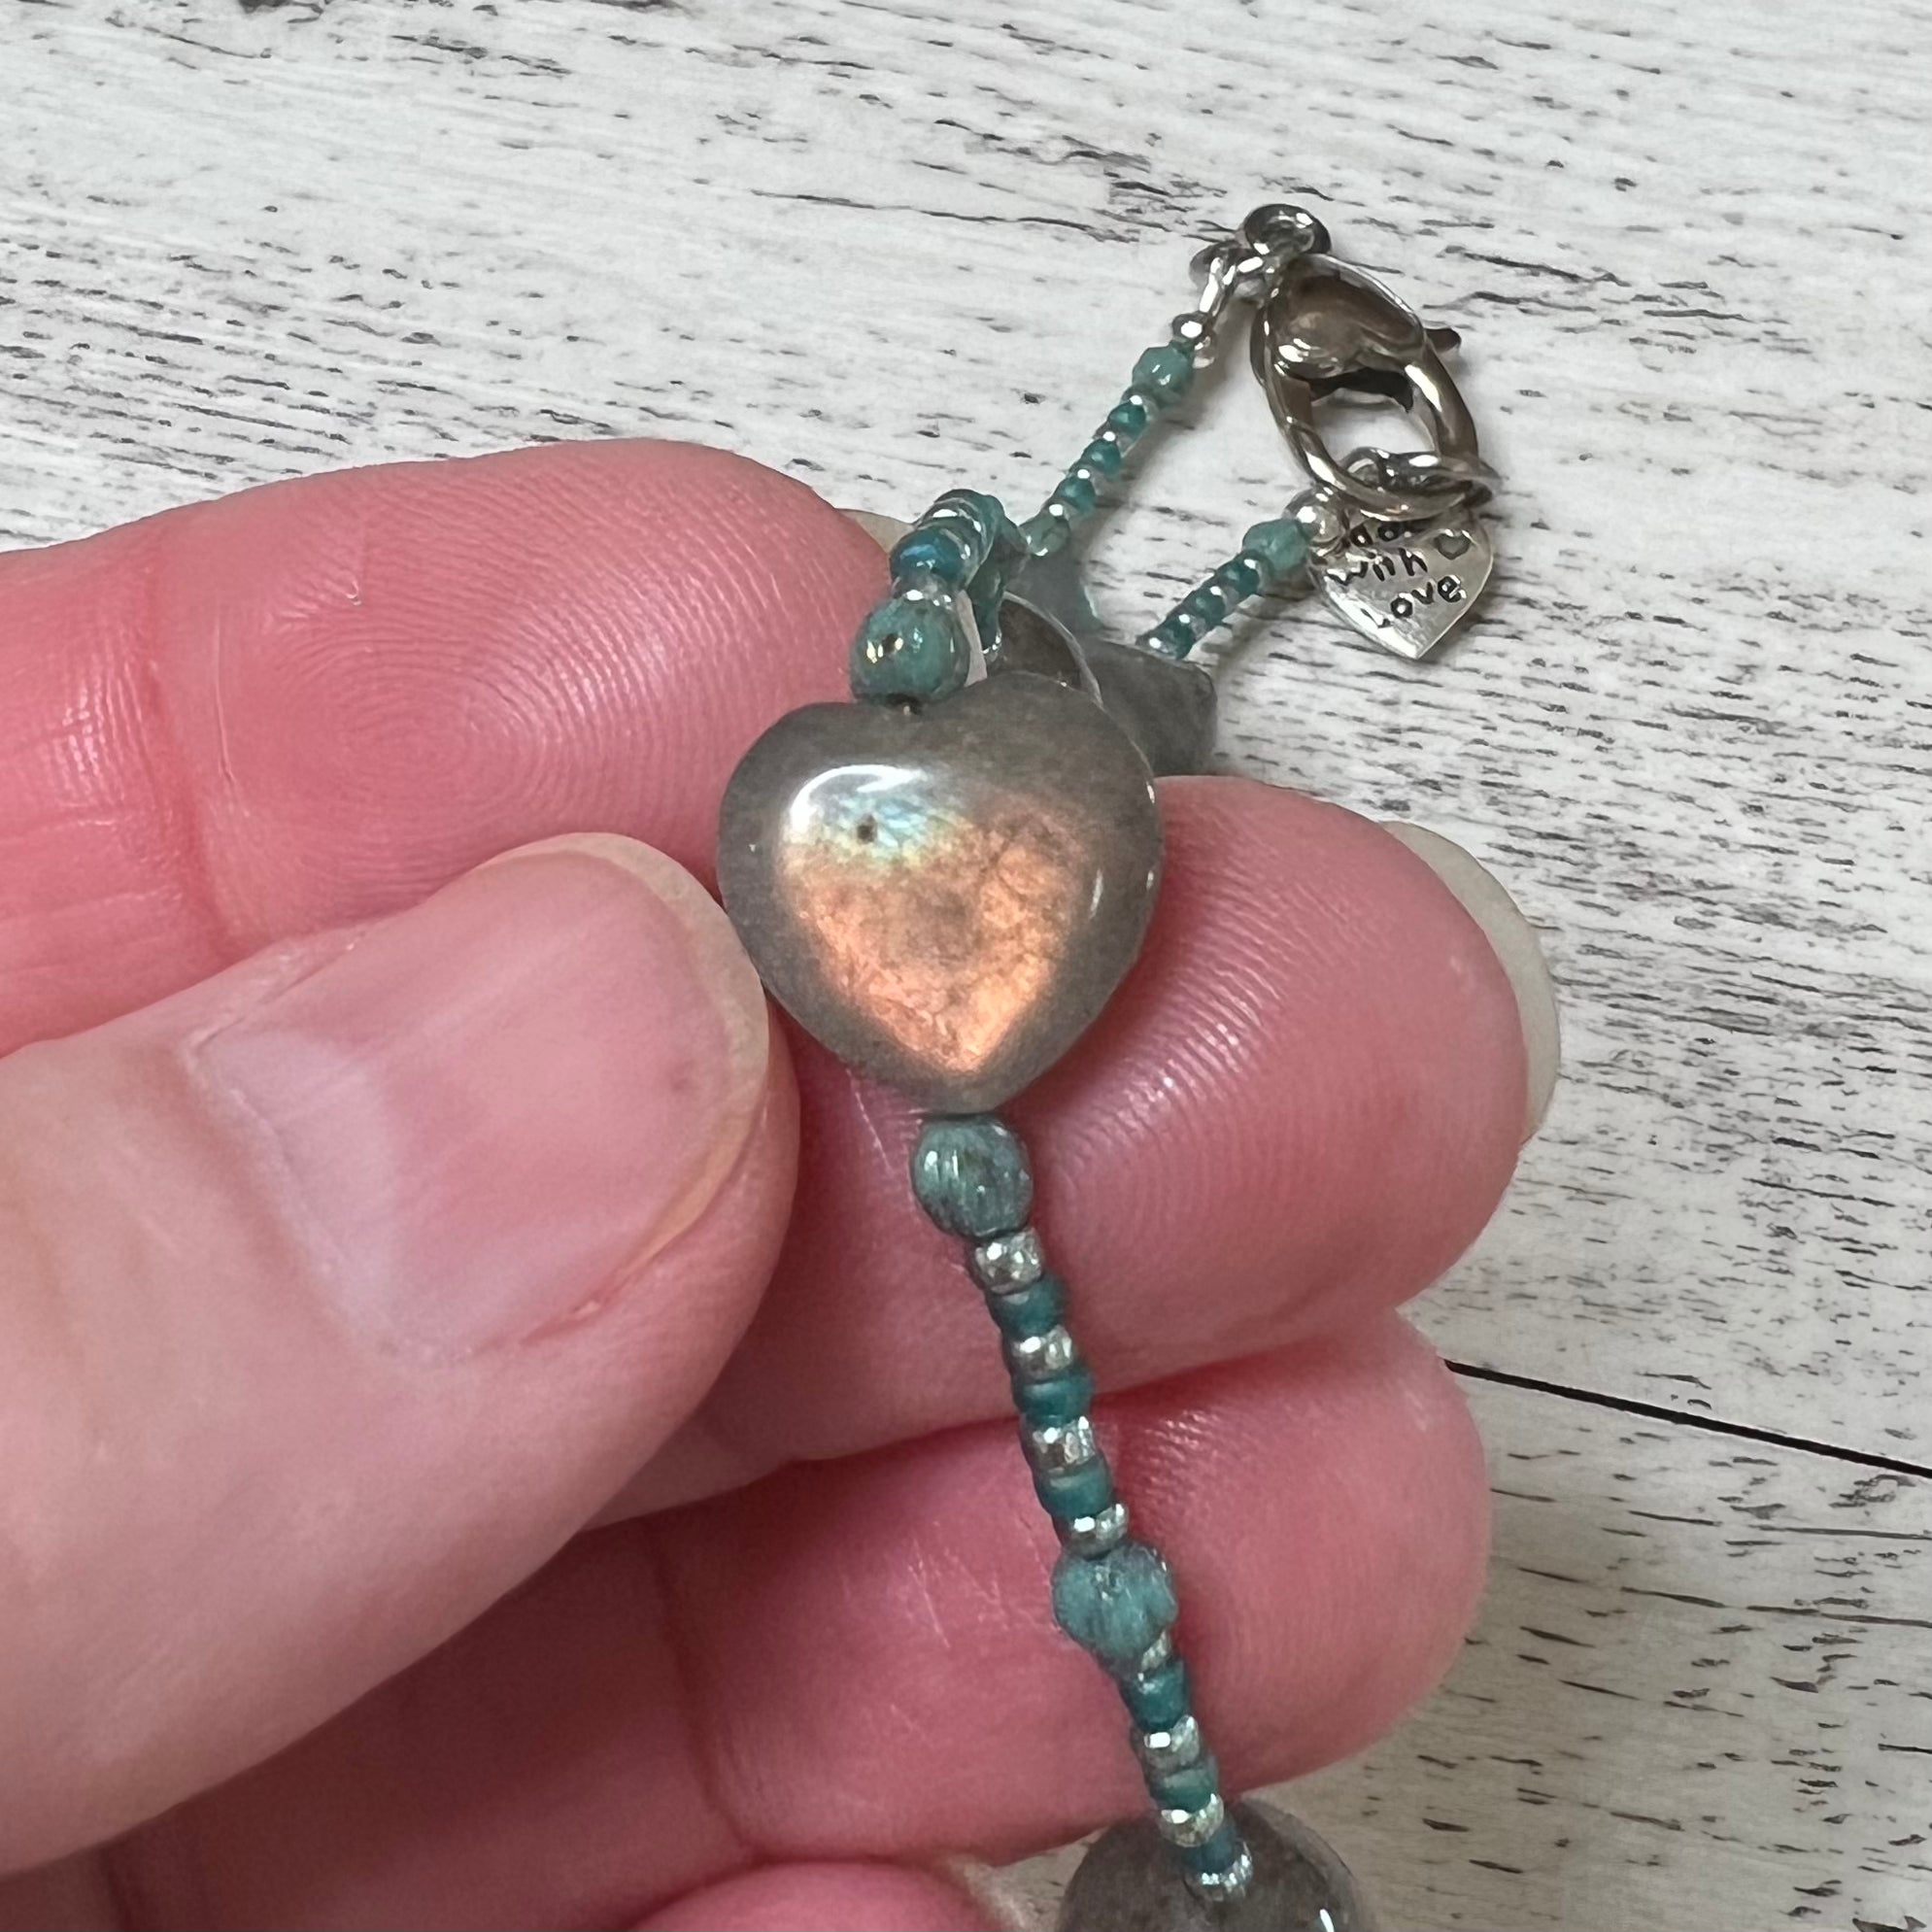 Free to Fly Angel Wing Labradorite Crystal Heart Necklace